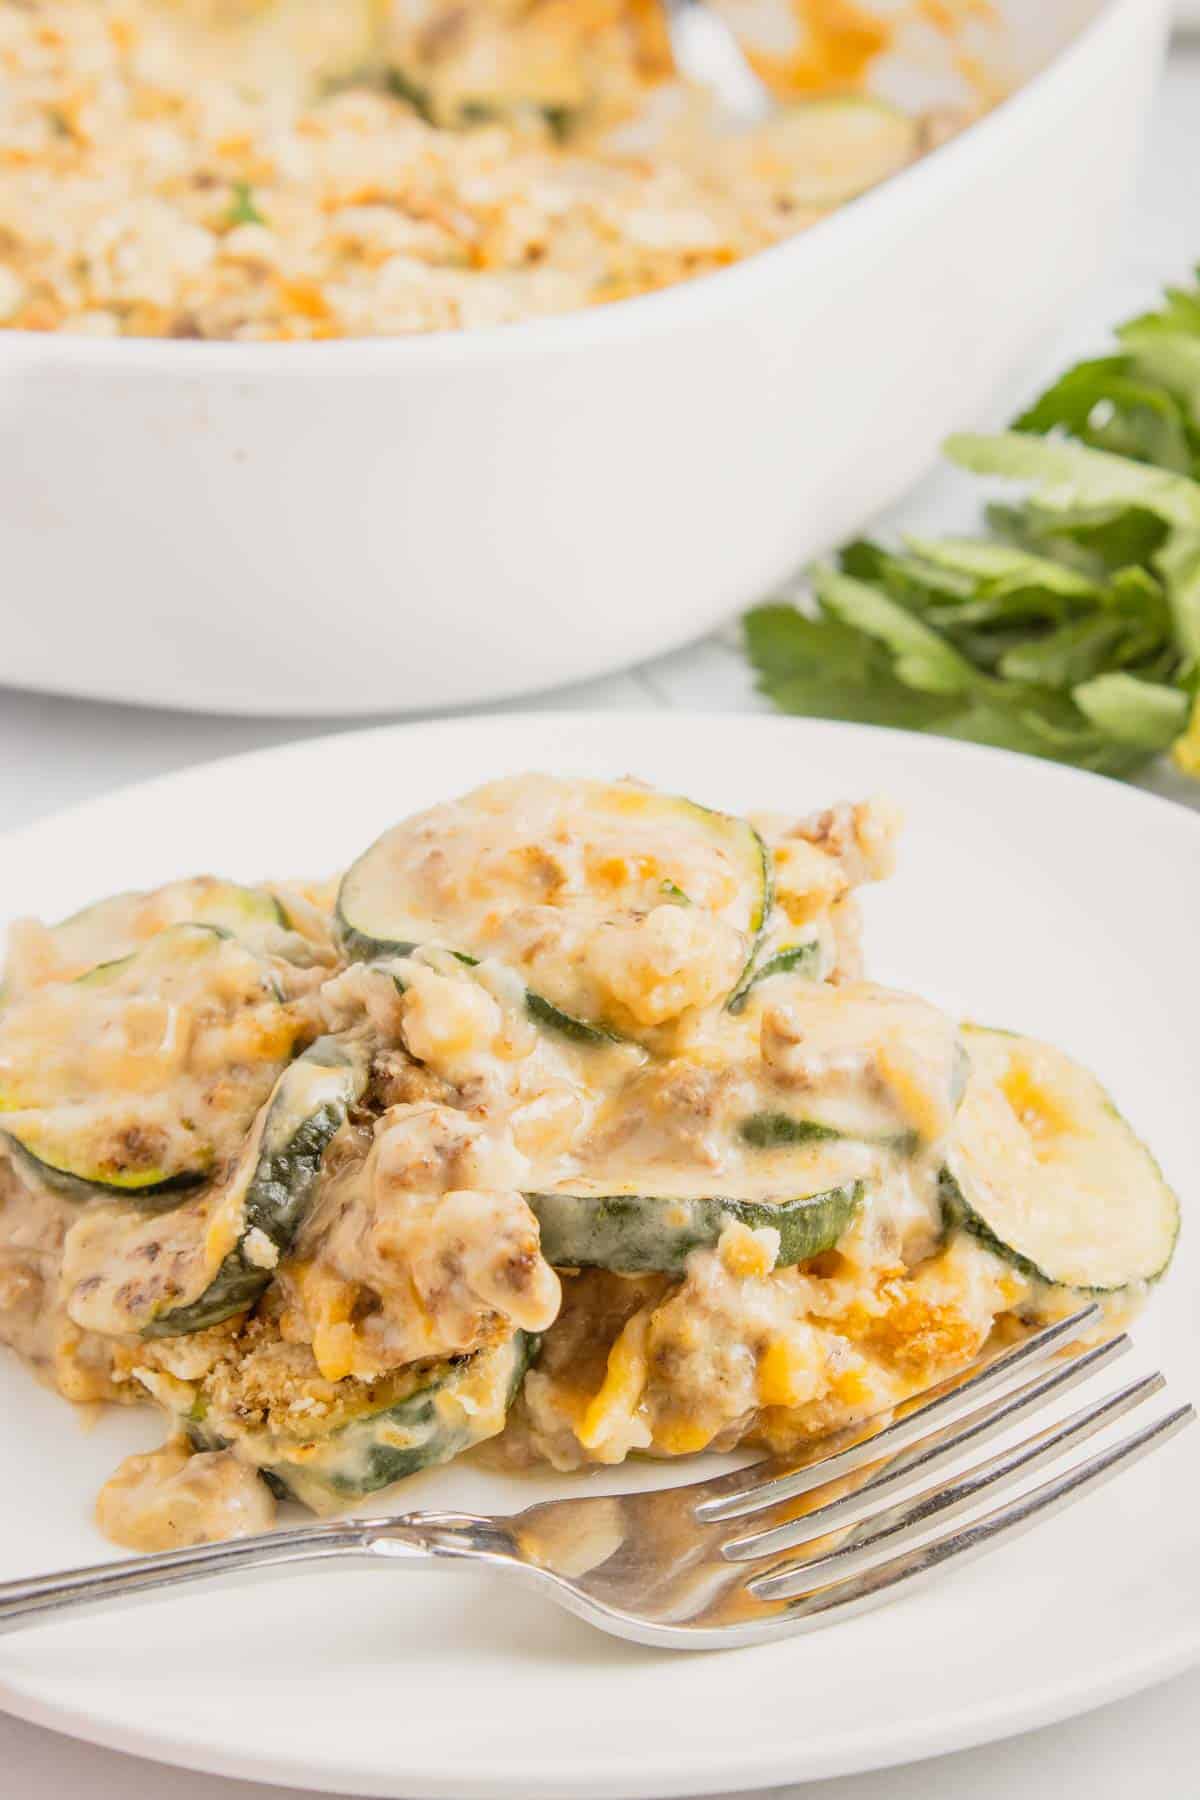 Zucchini Casserole with Ground Beef is a hearty casserole with layers of sliced zucchini, hamburger meat, a cream of mushroom based sauce mixture, shredded cheese and all baked with a Ritz cracker topping.